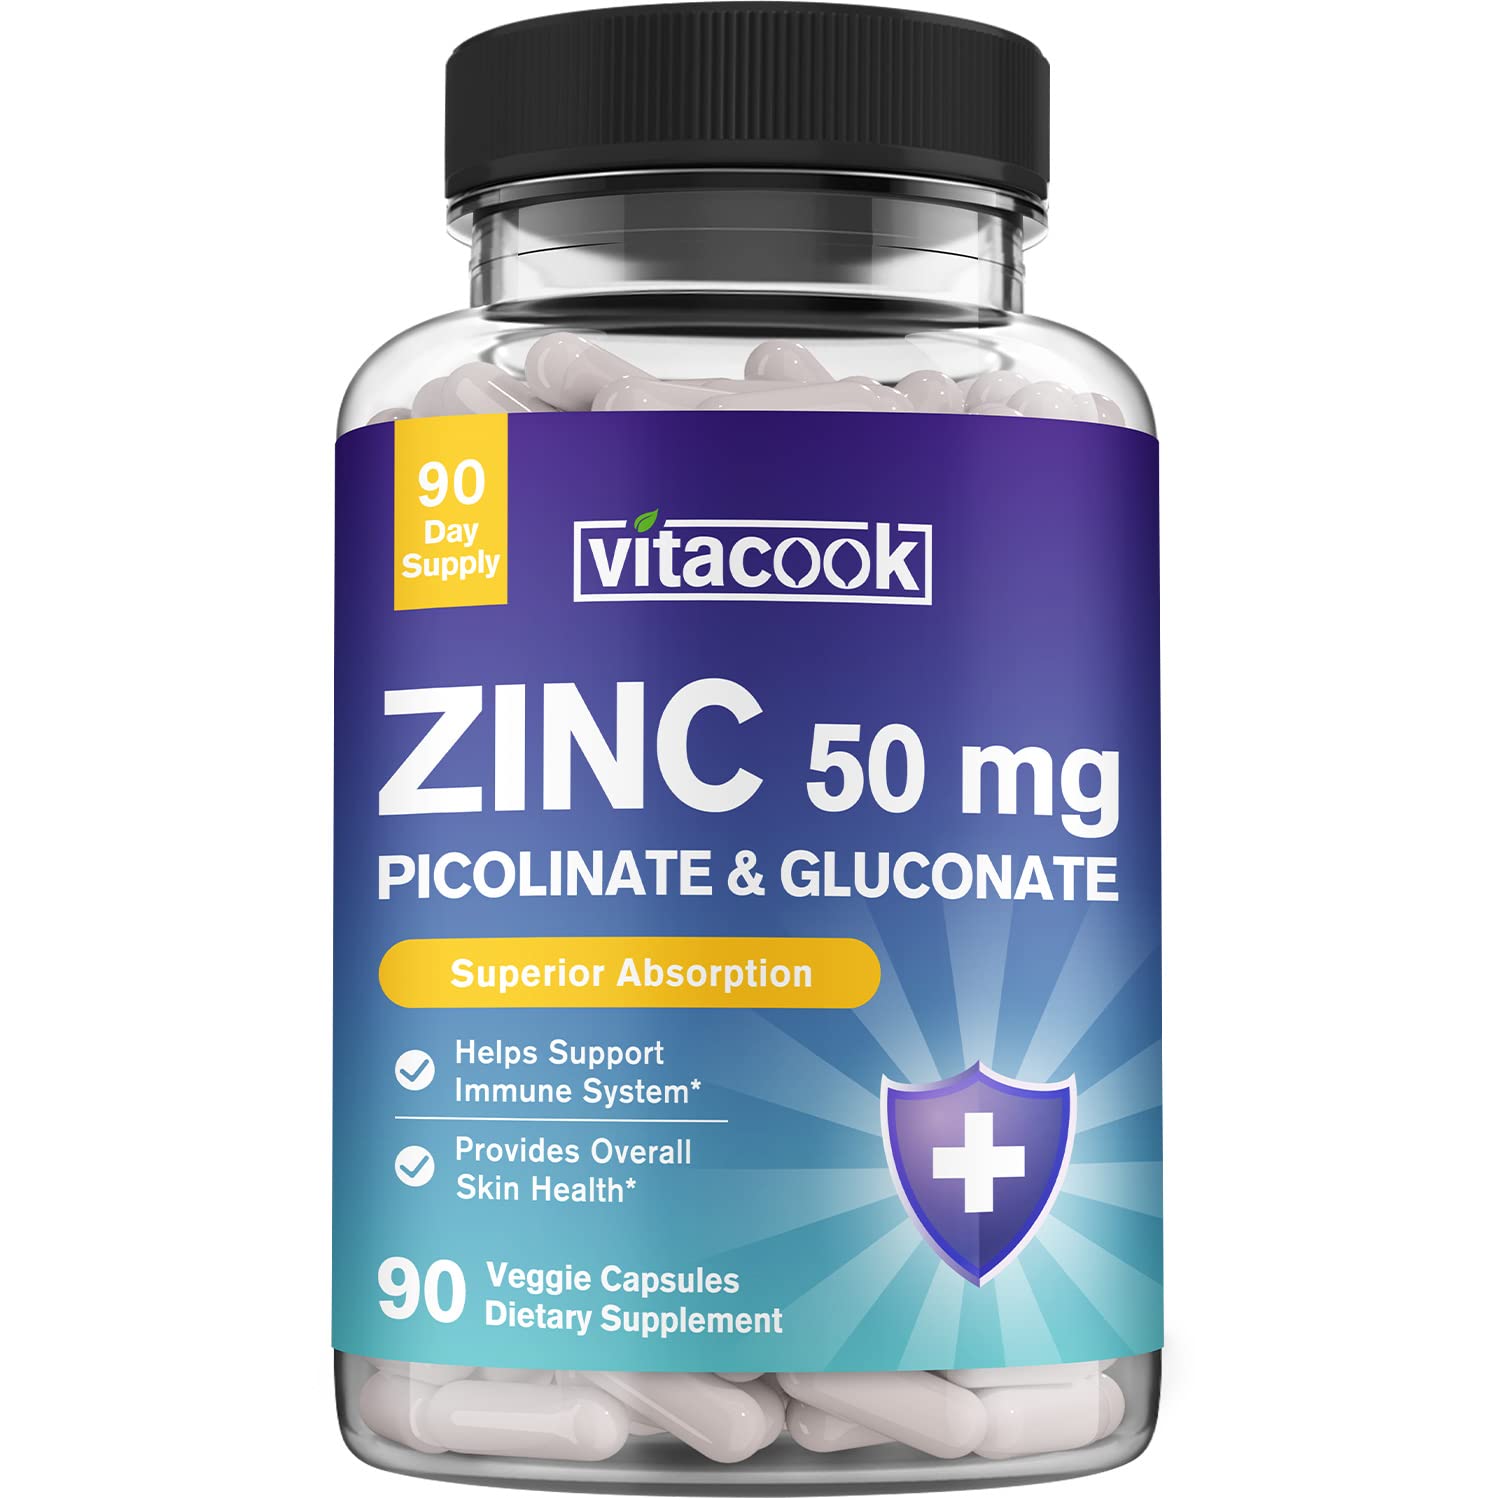 VitaCook Zinc Supplement, 50 mg of Elemental Zinc, High Potency, Zinc Gluconate & Picolinate for Superior Absorption, Immune, Antioxidant & Skin Support, Non-GMO, Once Daily, 90 Veggie Capsules